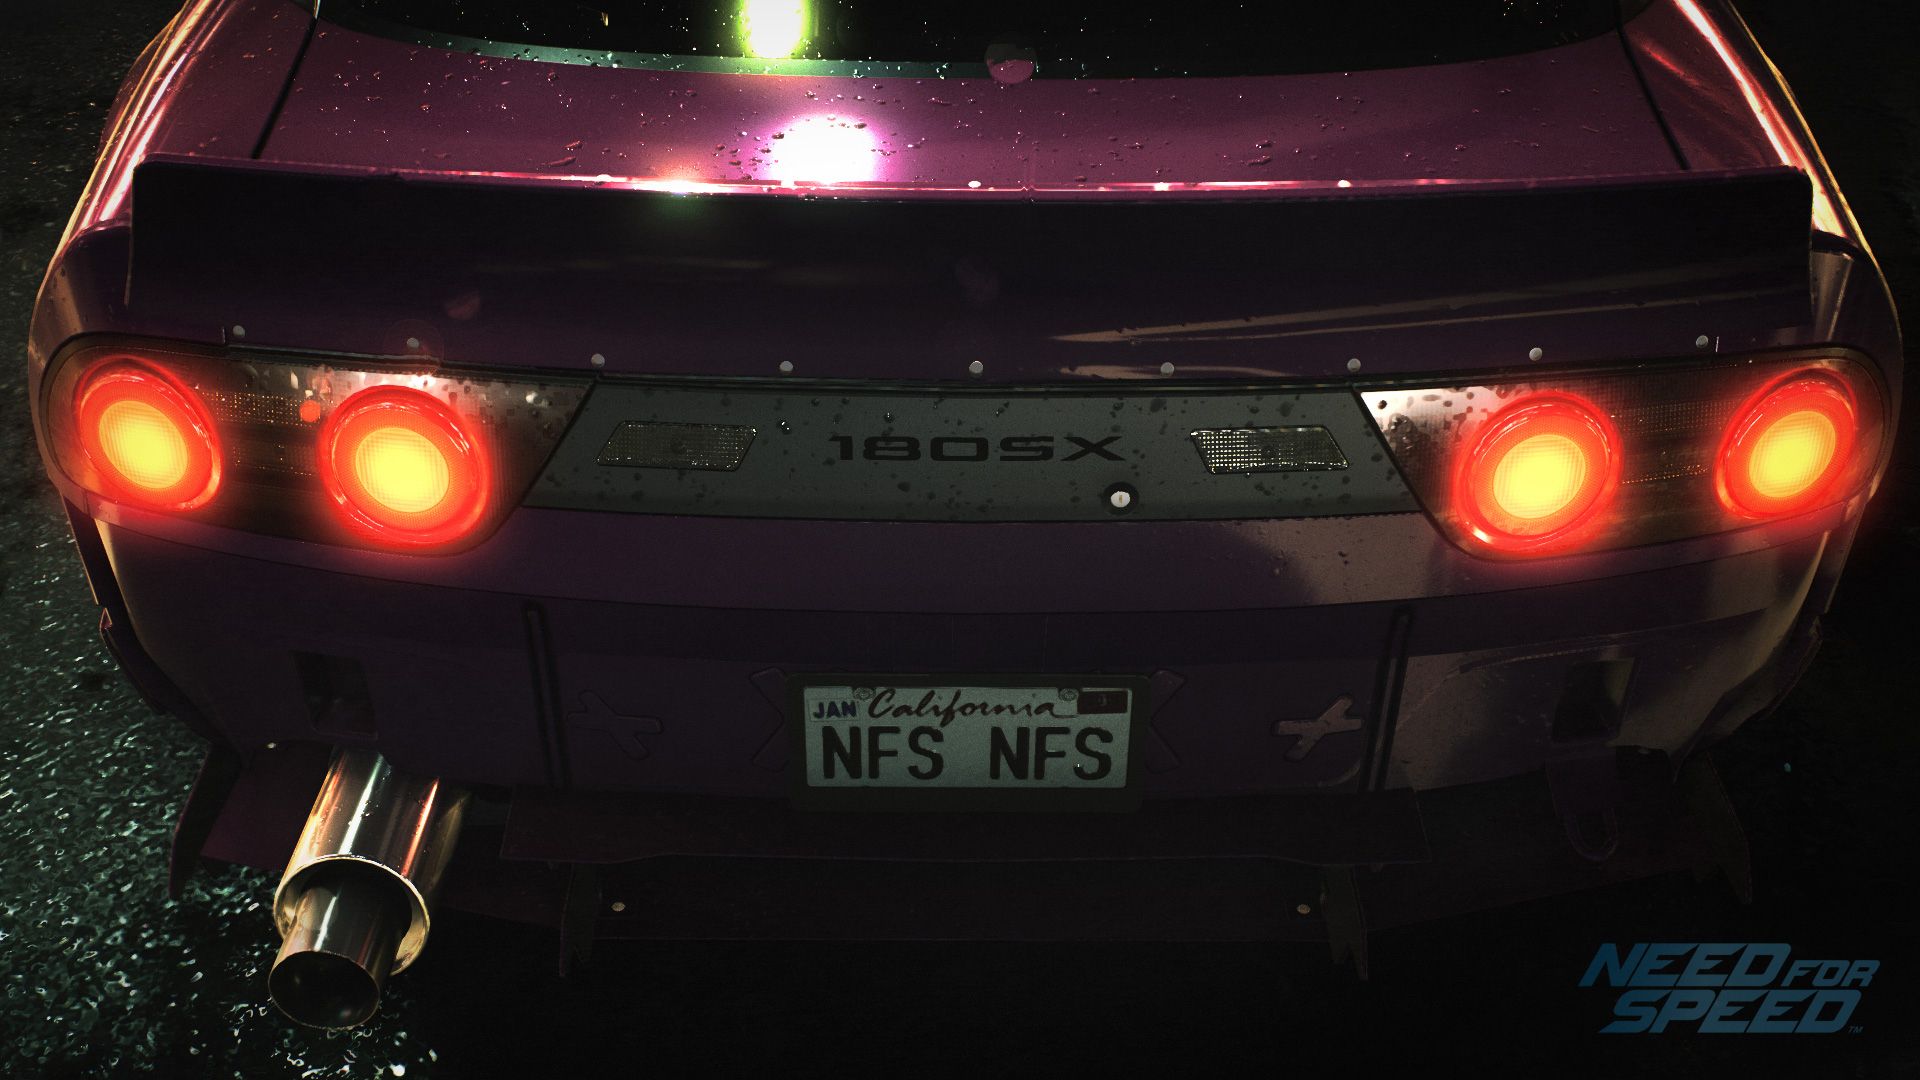 Need for Speed reboot - 5